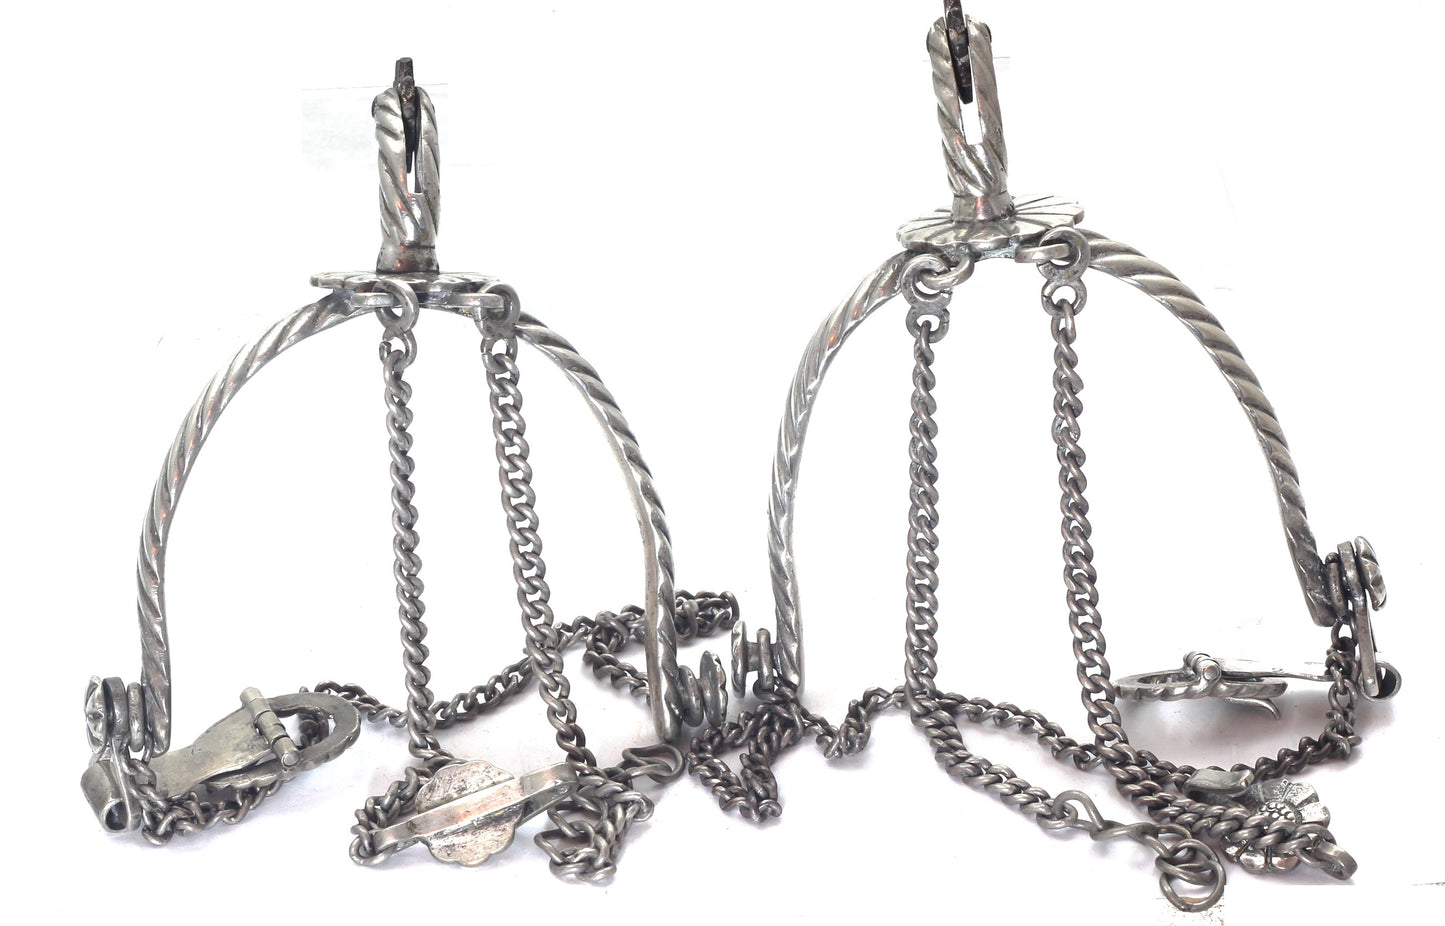 Pair of 19th or early 20th Century Latin American Gaucho Spurs